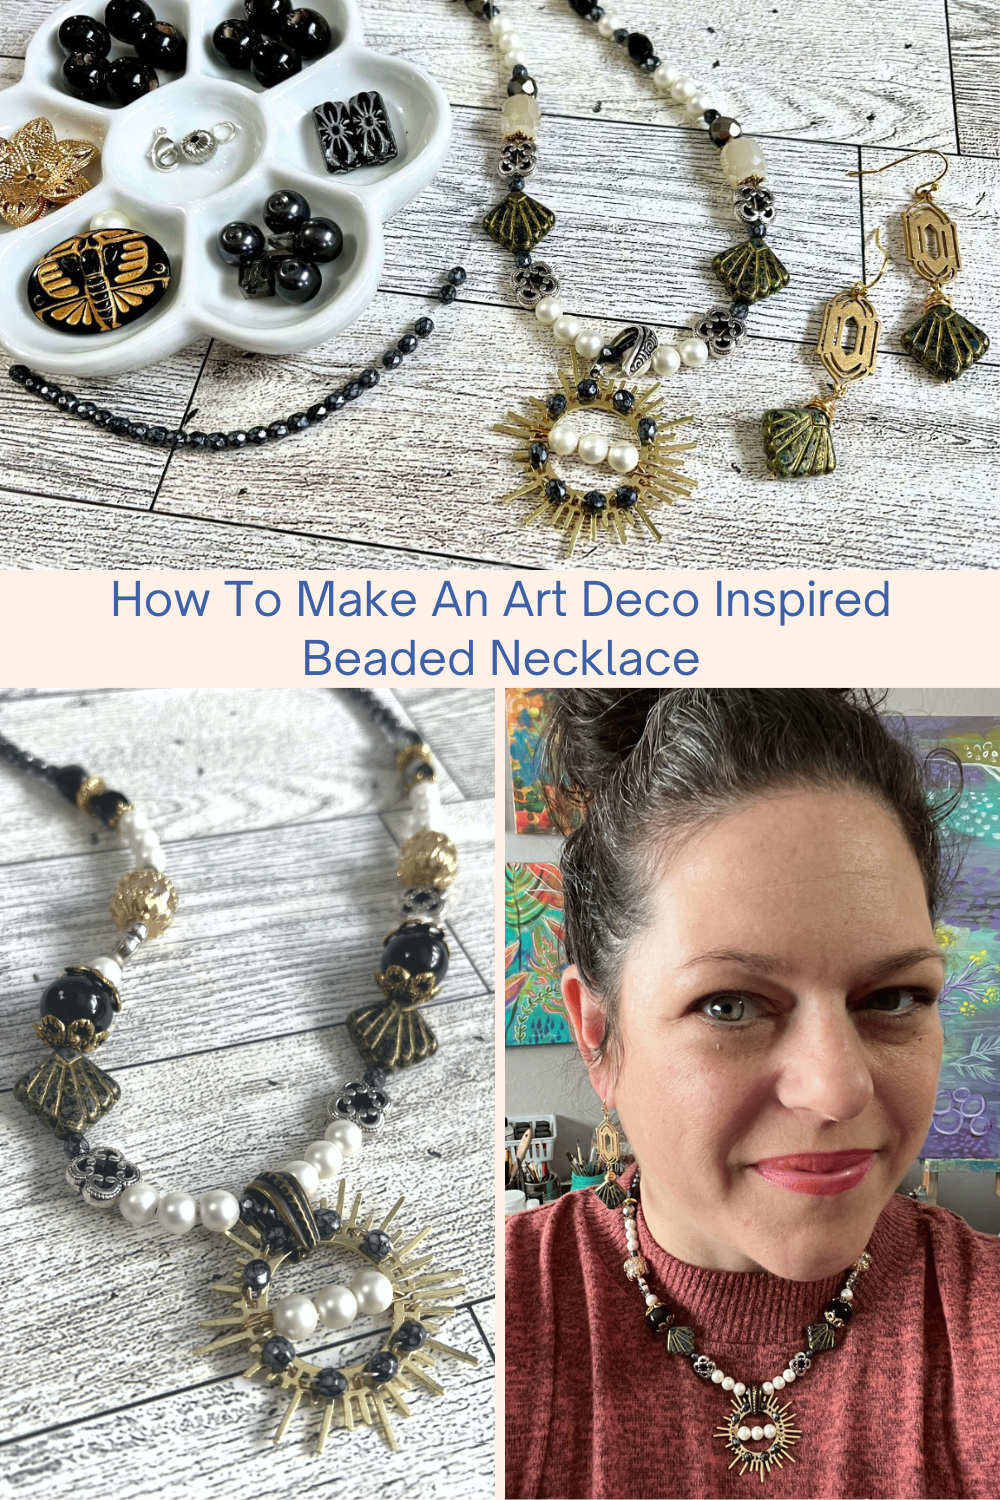 How To Make An Art Deco Inspired Beaded Necklace Collage